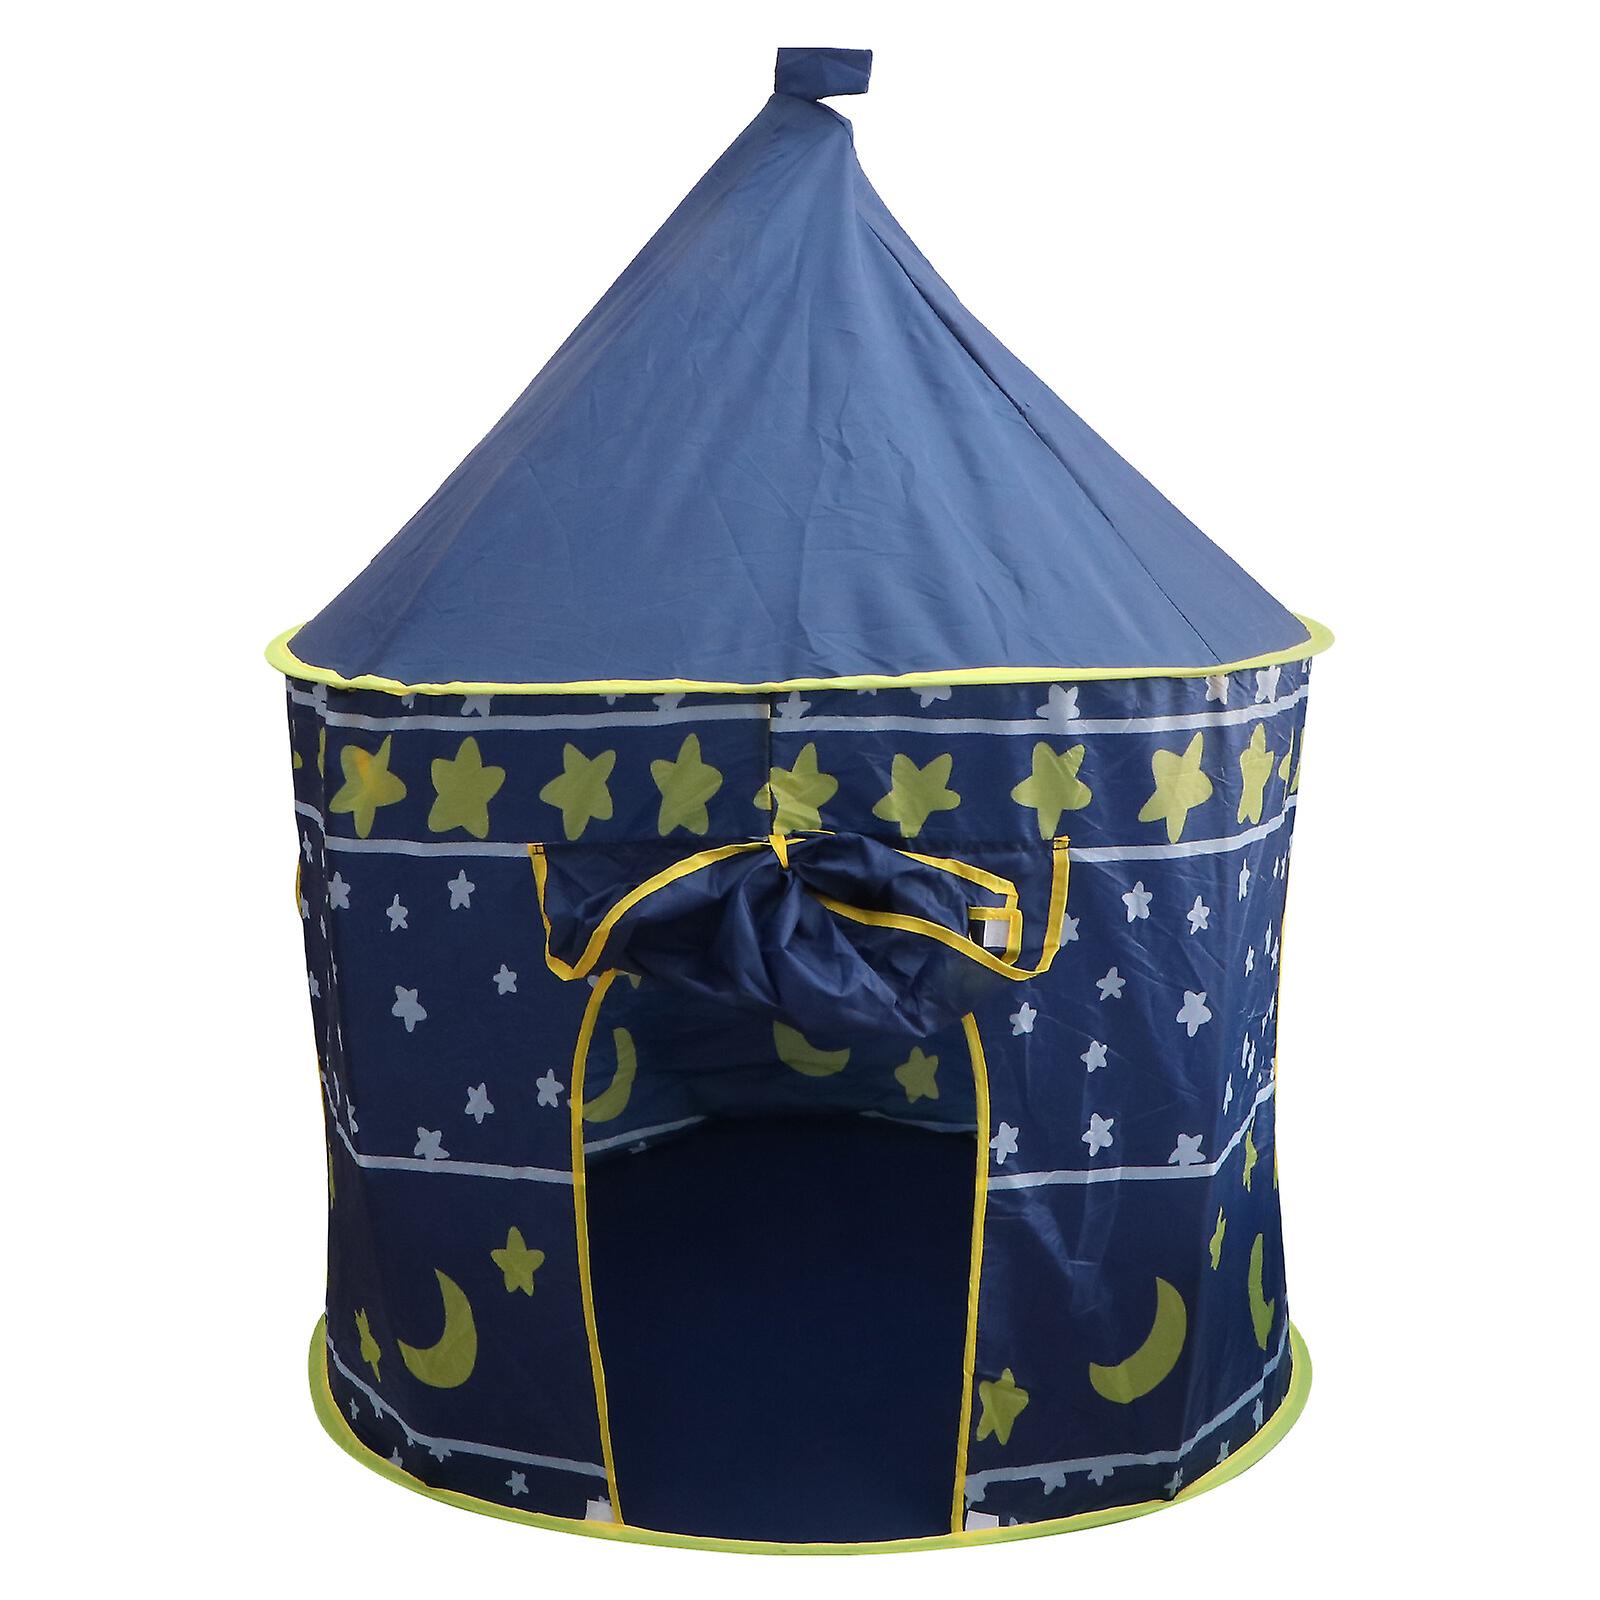 Baby Yurt Moon Star Pattern Tent Foldable Game House Kids Playhouse For Outdoors